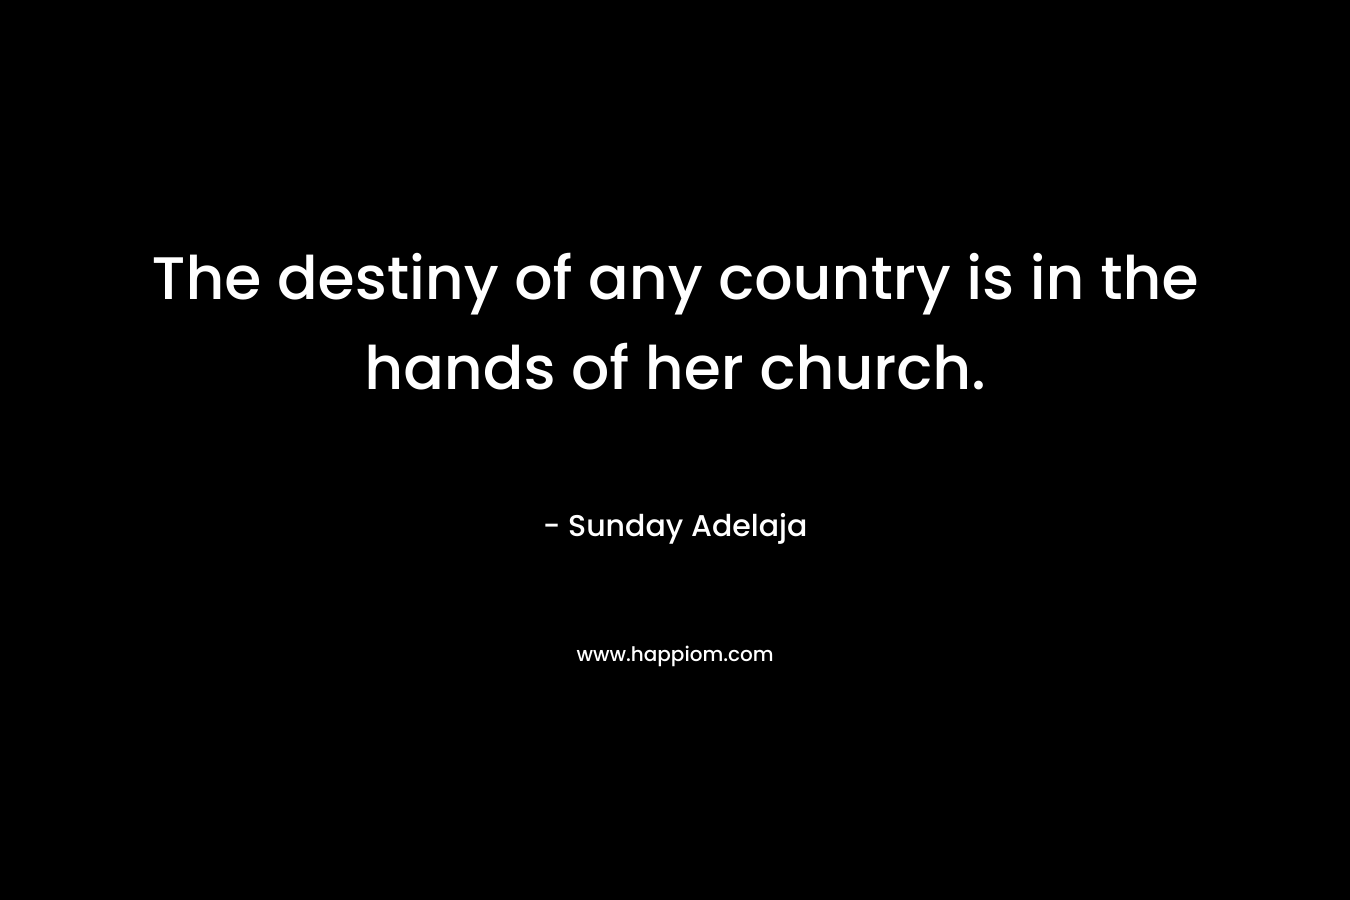 The destiny of any country is in the hands of her church.